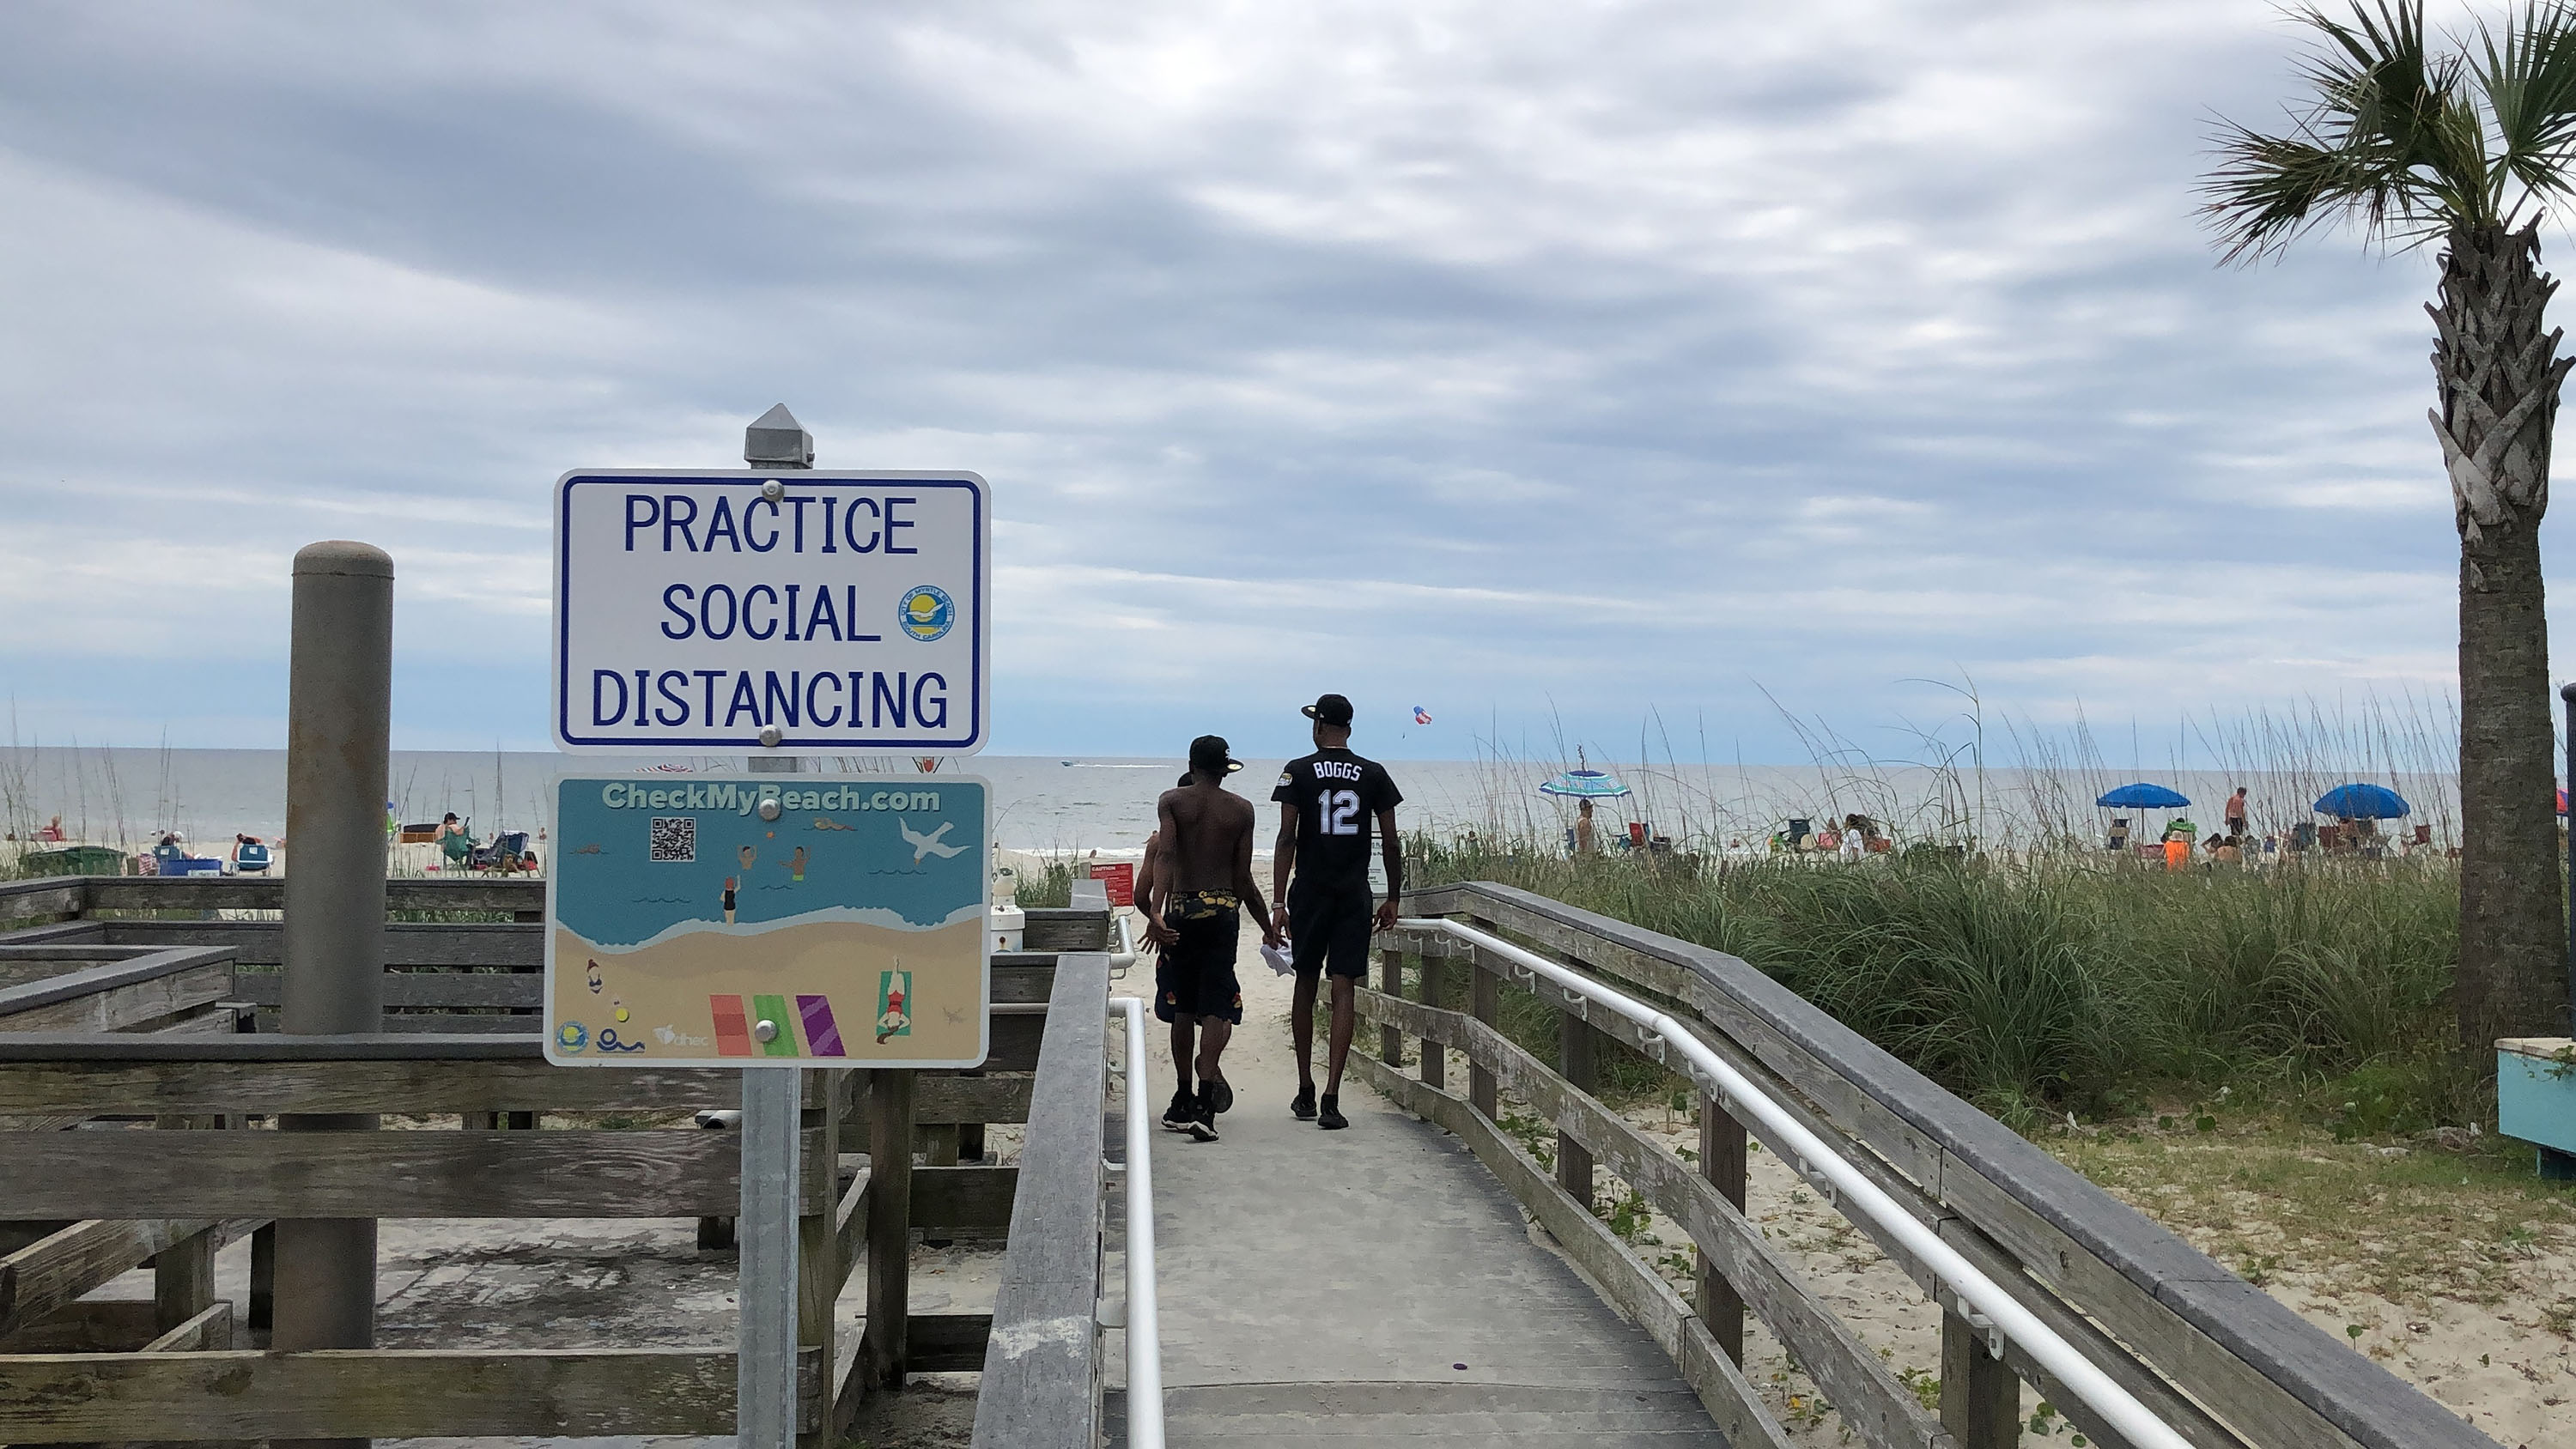 A sign pictured in Myrtle Beach, S.C. on June 18 advises people to maintain social distancing.